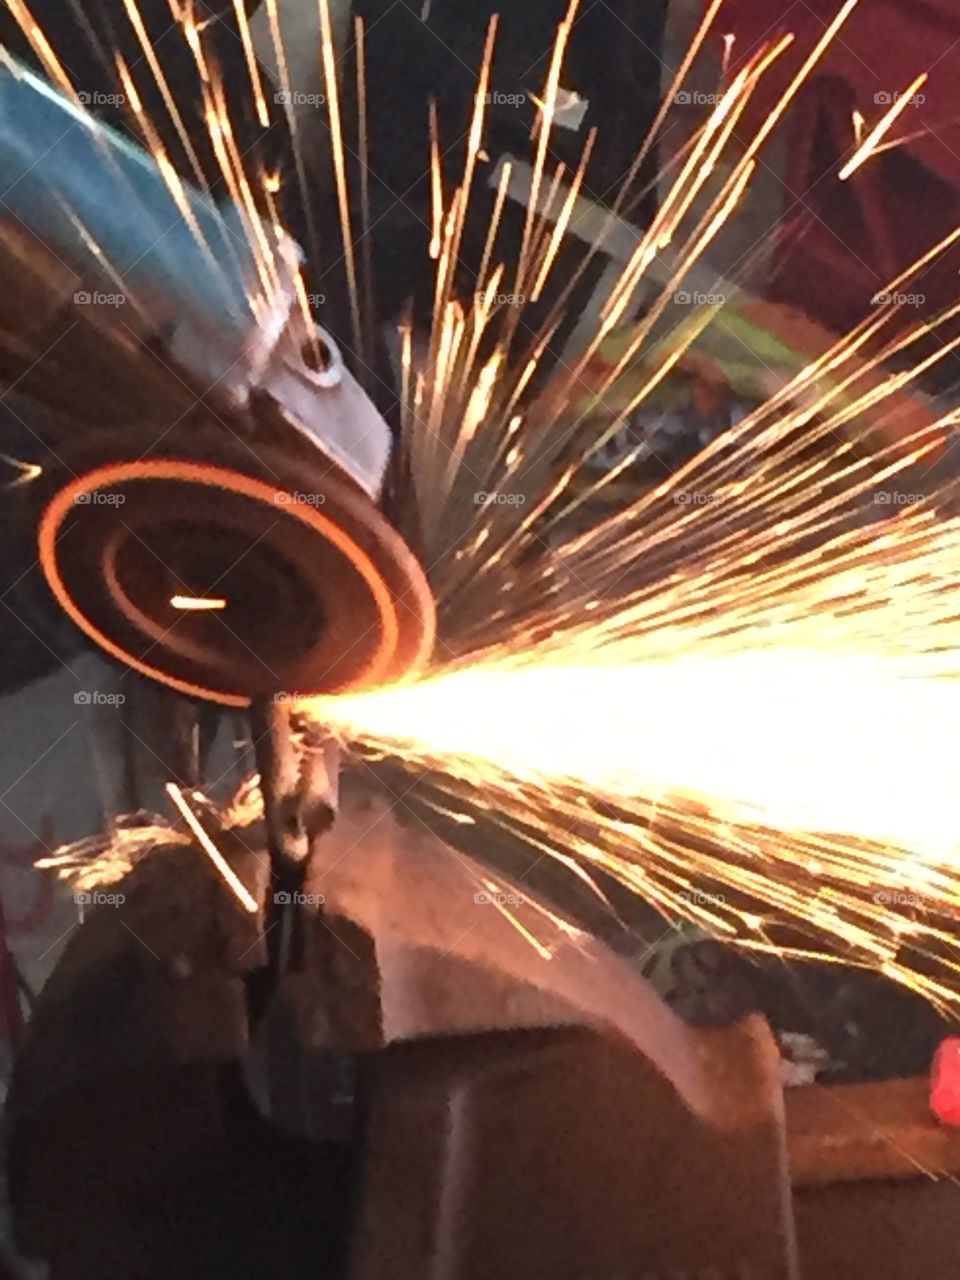 A grinder in motion can be a beautiful and colourful thing yet also a dangerous items you put into the wrong hands the sparks coming from the grinder makes an impressive photo